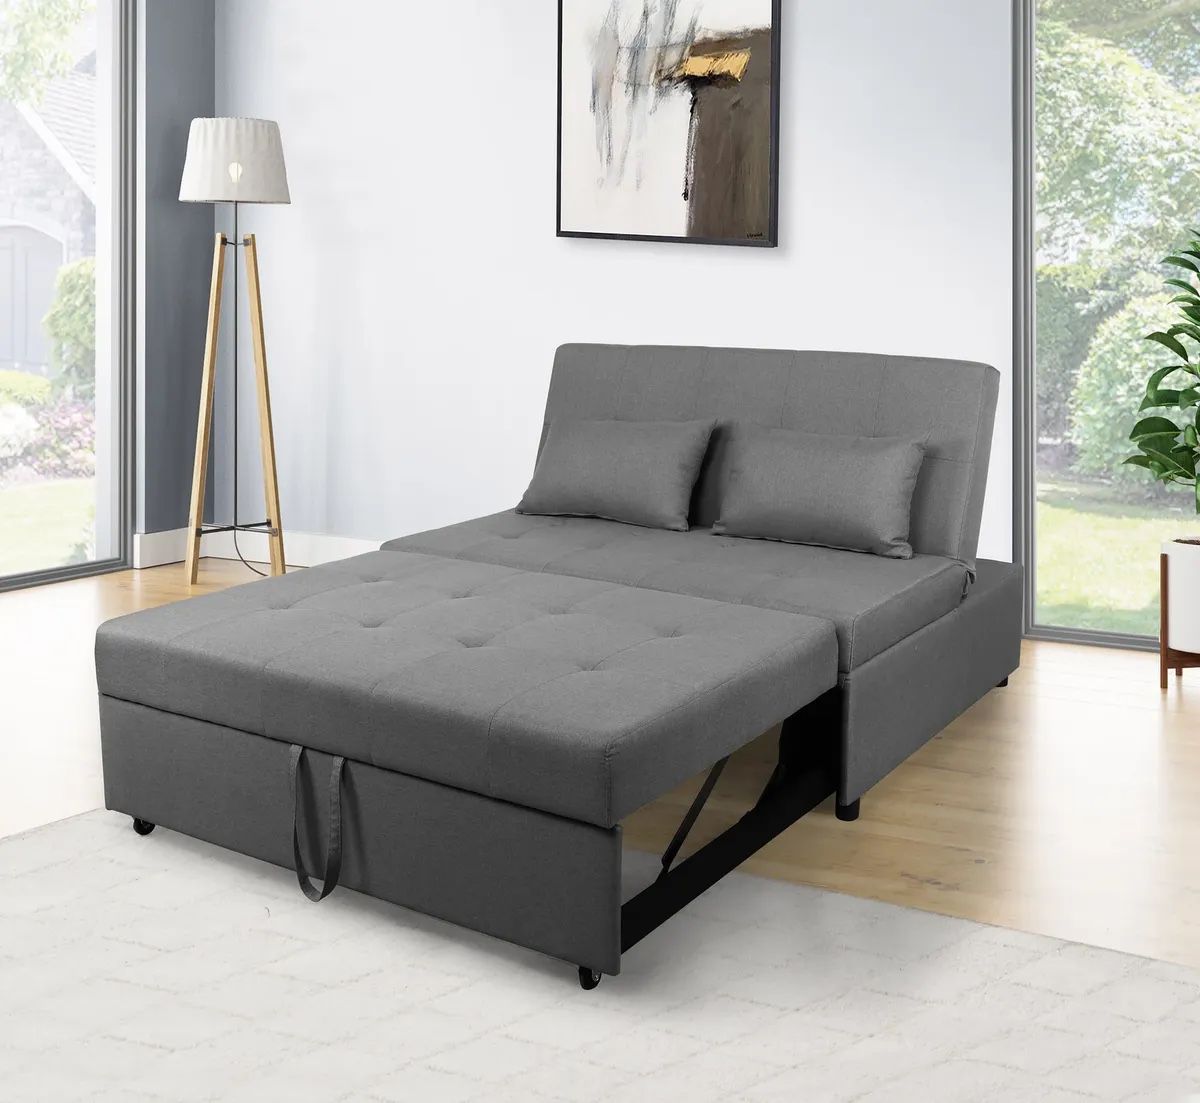 Ancona Collection 2-Seat Adjustable Sofa Bed- Available in 2 colors Now On Sale 679.00 Free 🚚 